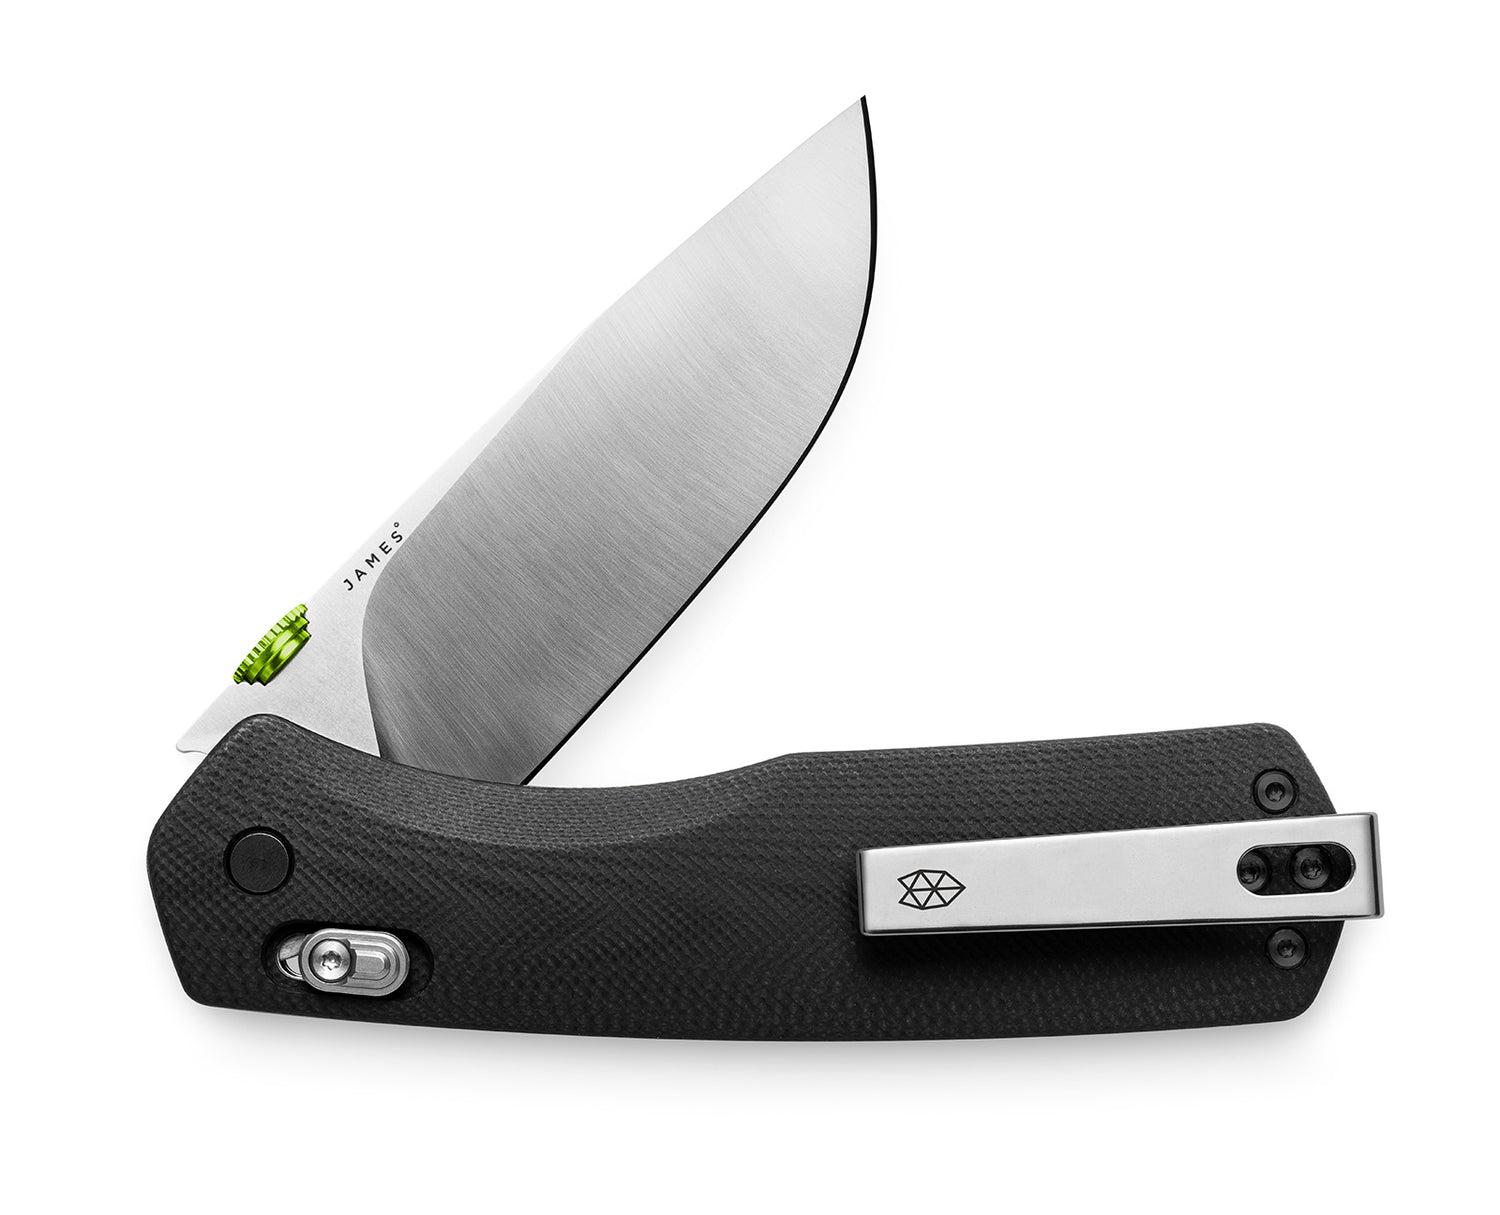 The Carter XL knife with black handle and stainless steel blade.